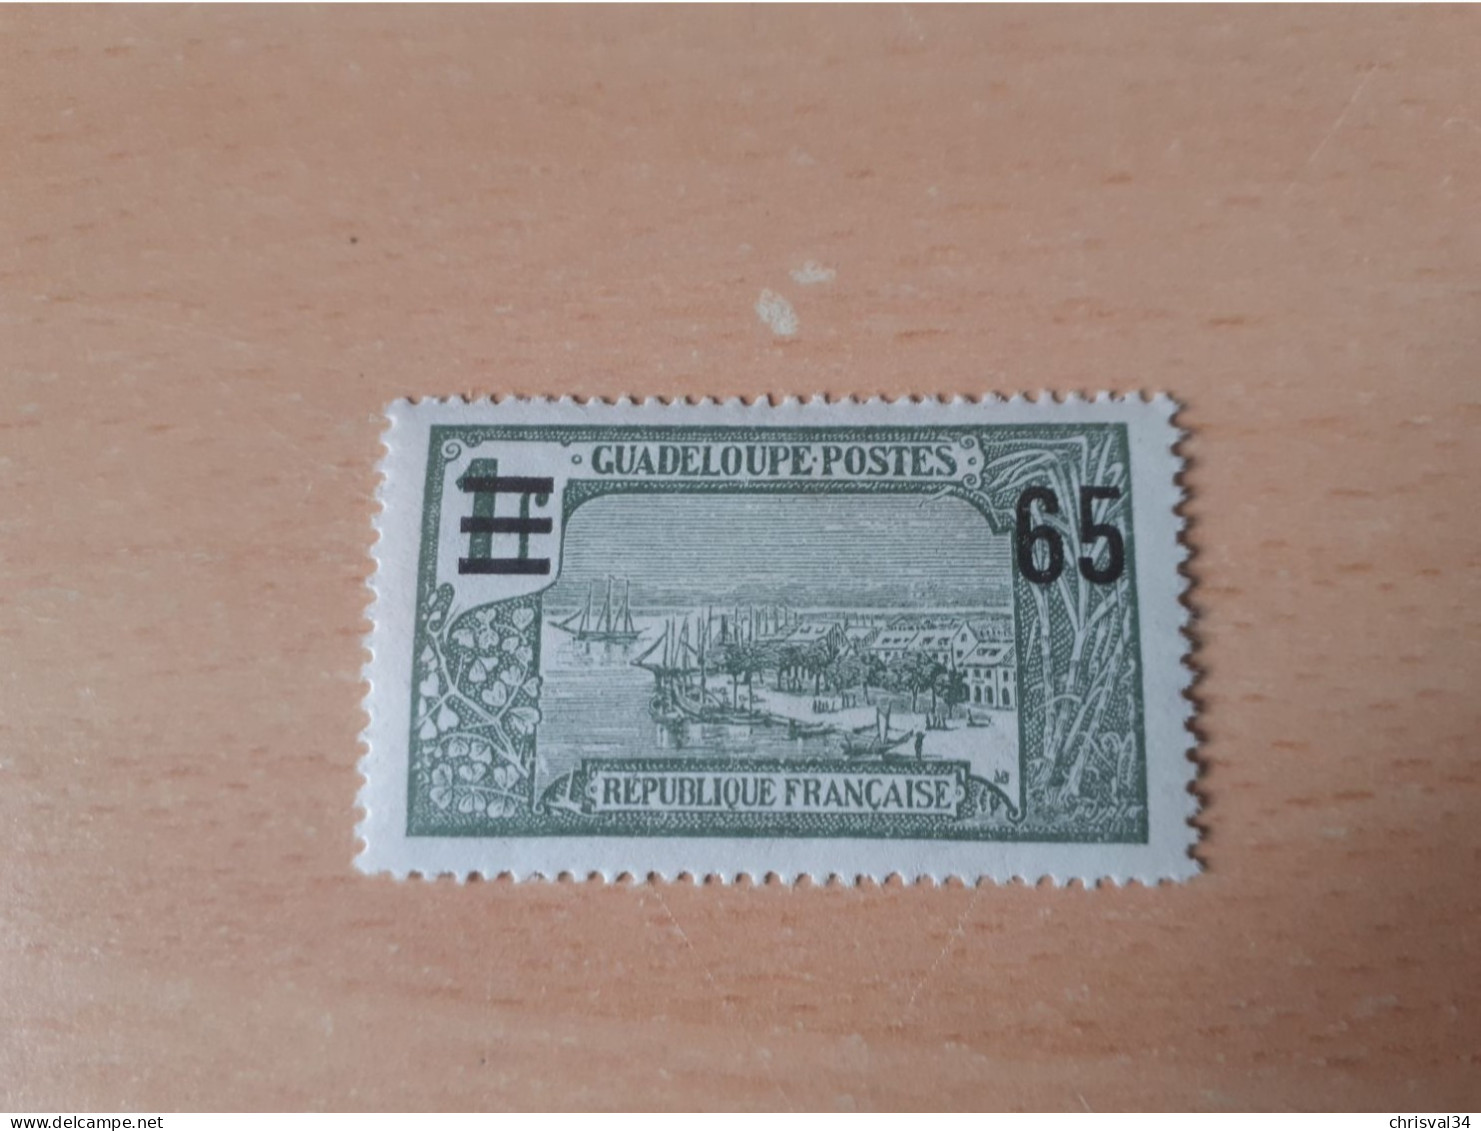 TIMBRE   GUADELOUPE       N  90     COTE  2,50   EUROS  NEUF  SANS  CHARNIERE - Ungebraucht